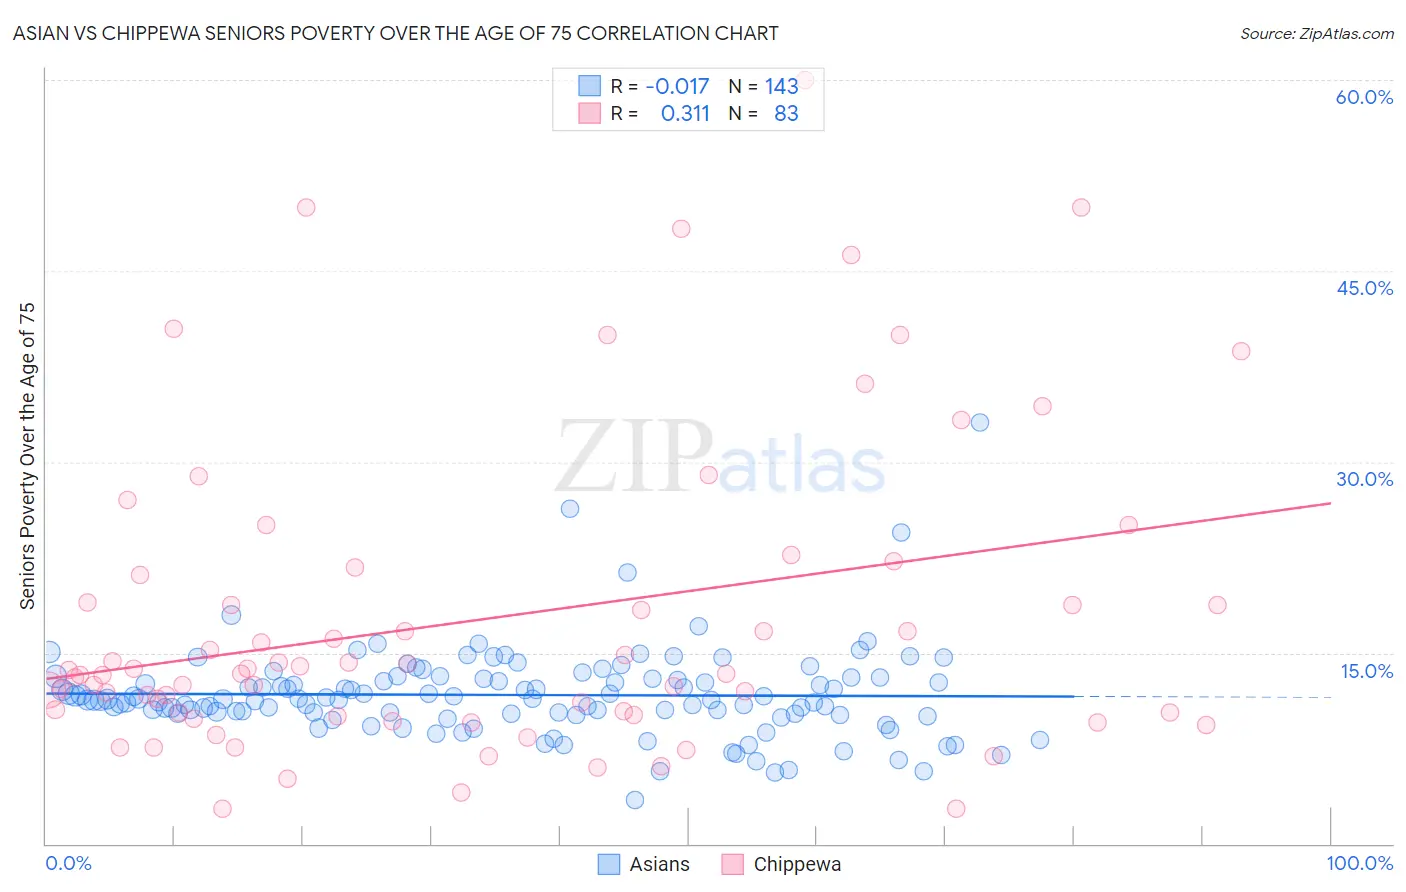 Asian vs Chippewa Seniors Poverty Over the Age of 75